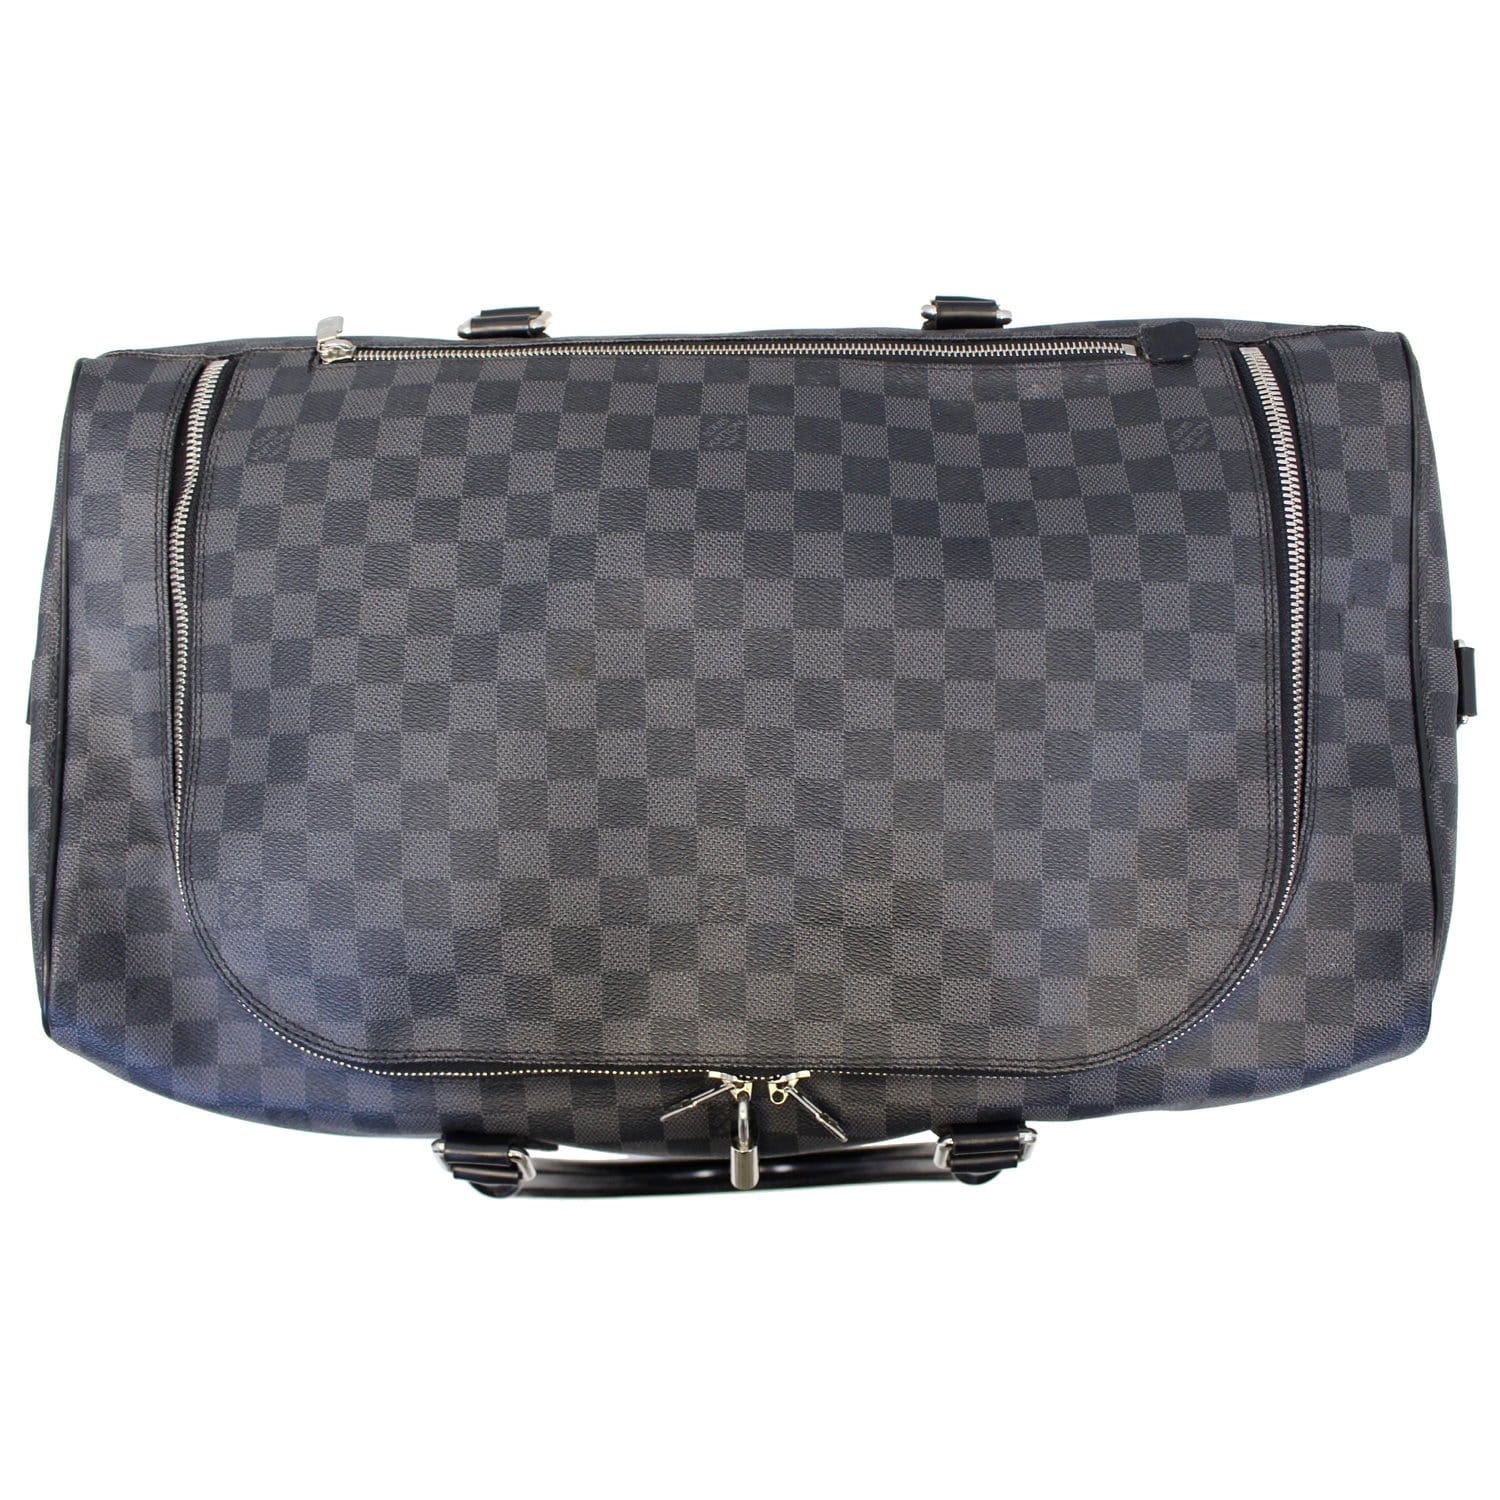 Louis Vuitton Damier Graphite Roadster bag. It's time for a weekend road  trip!